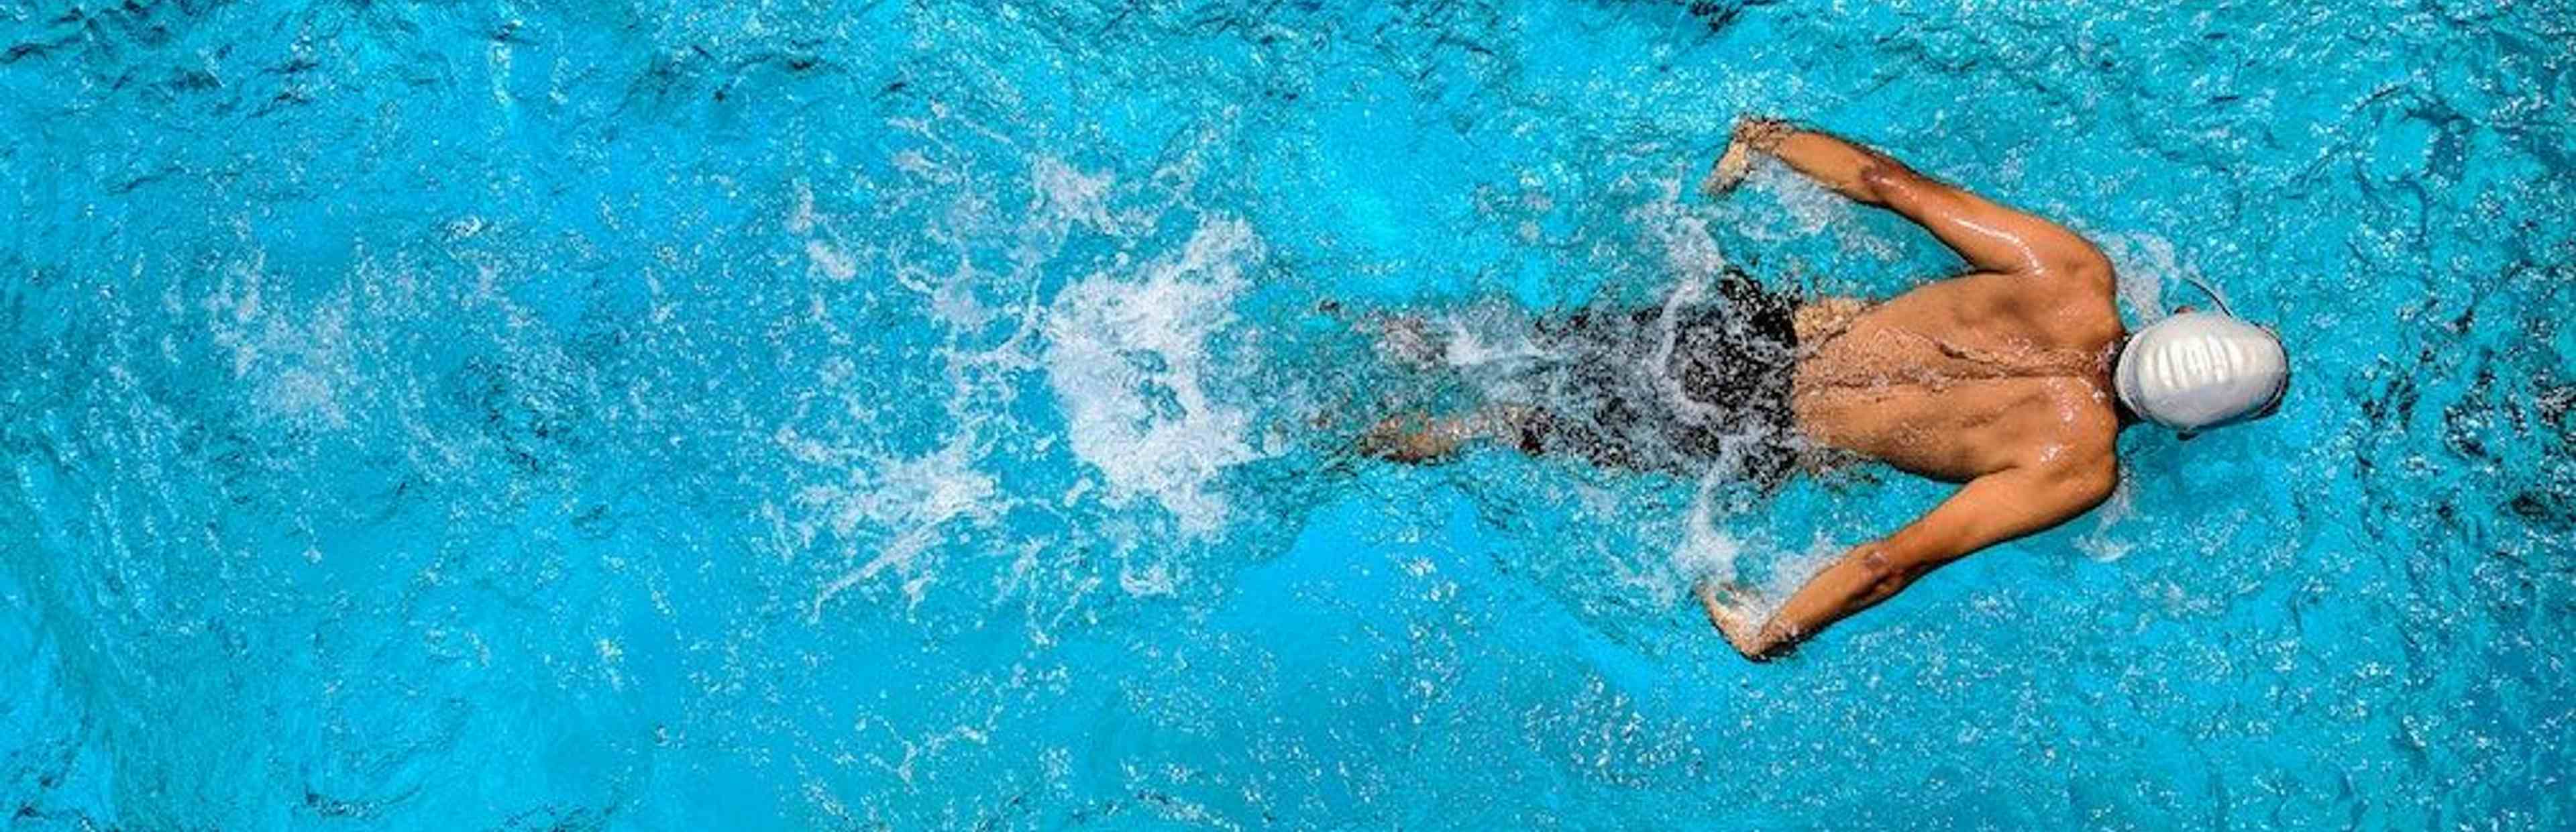 Overhead view of swimmer